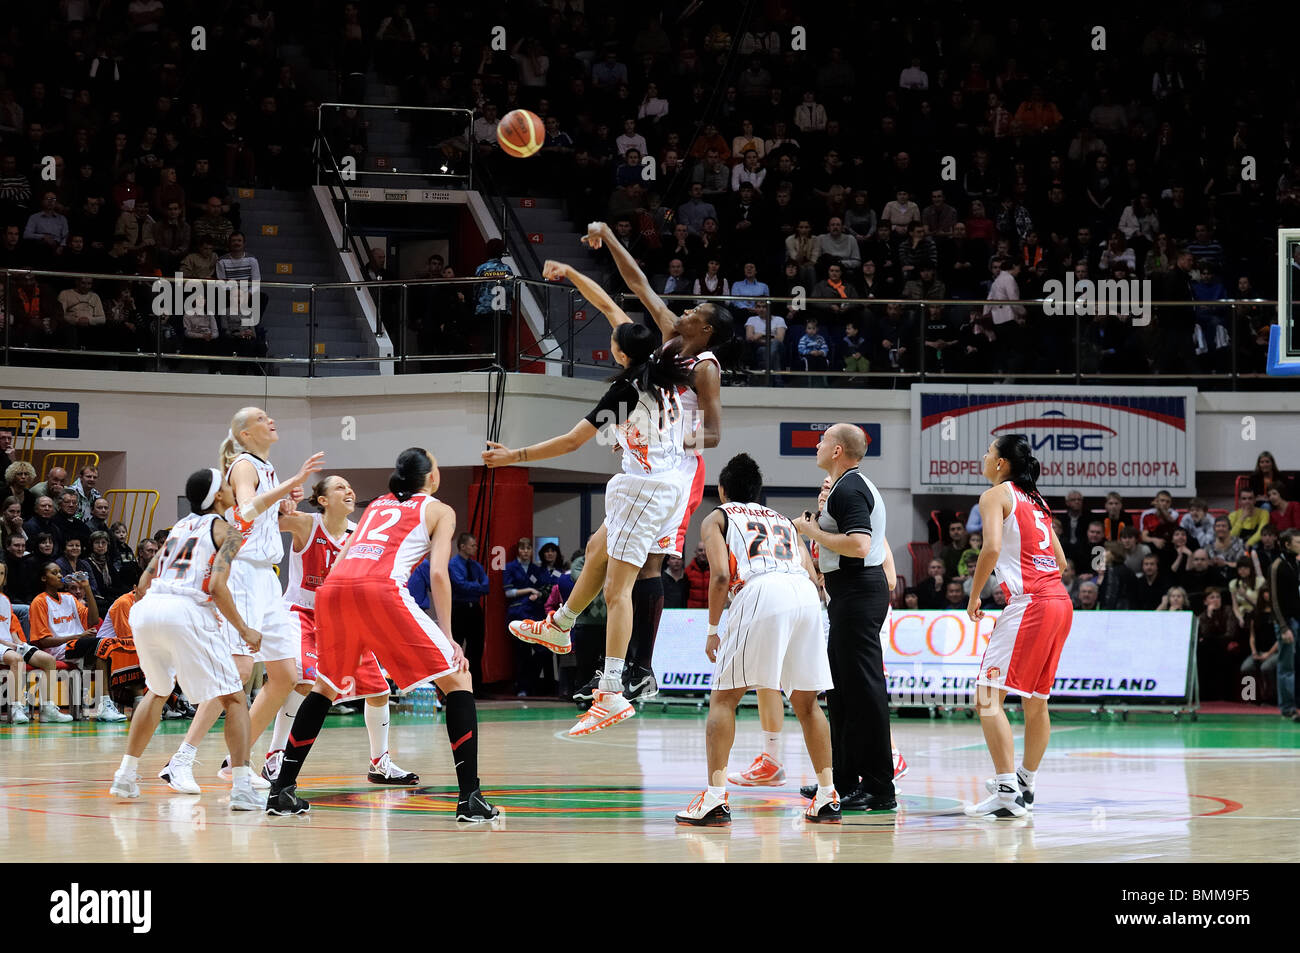 Candace Parker #13 and Sylvia Fowles #34. Jumpball. Stock Photo